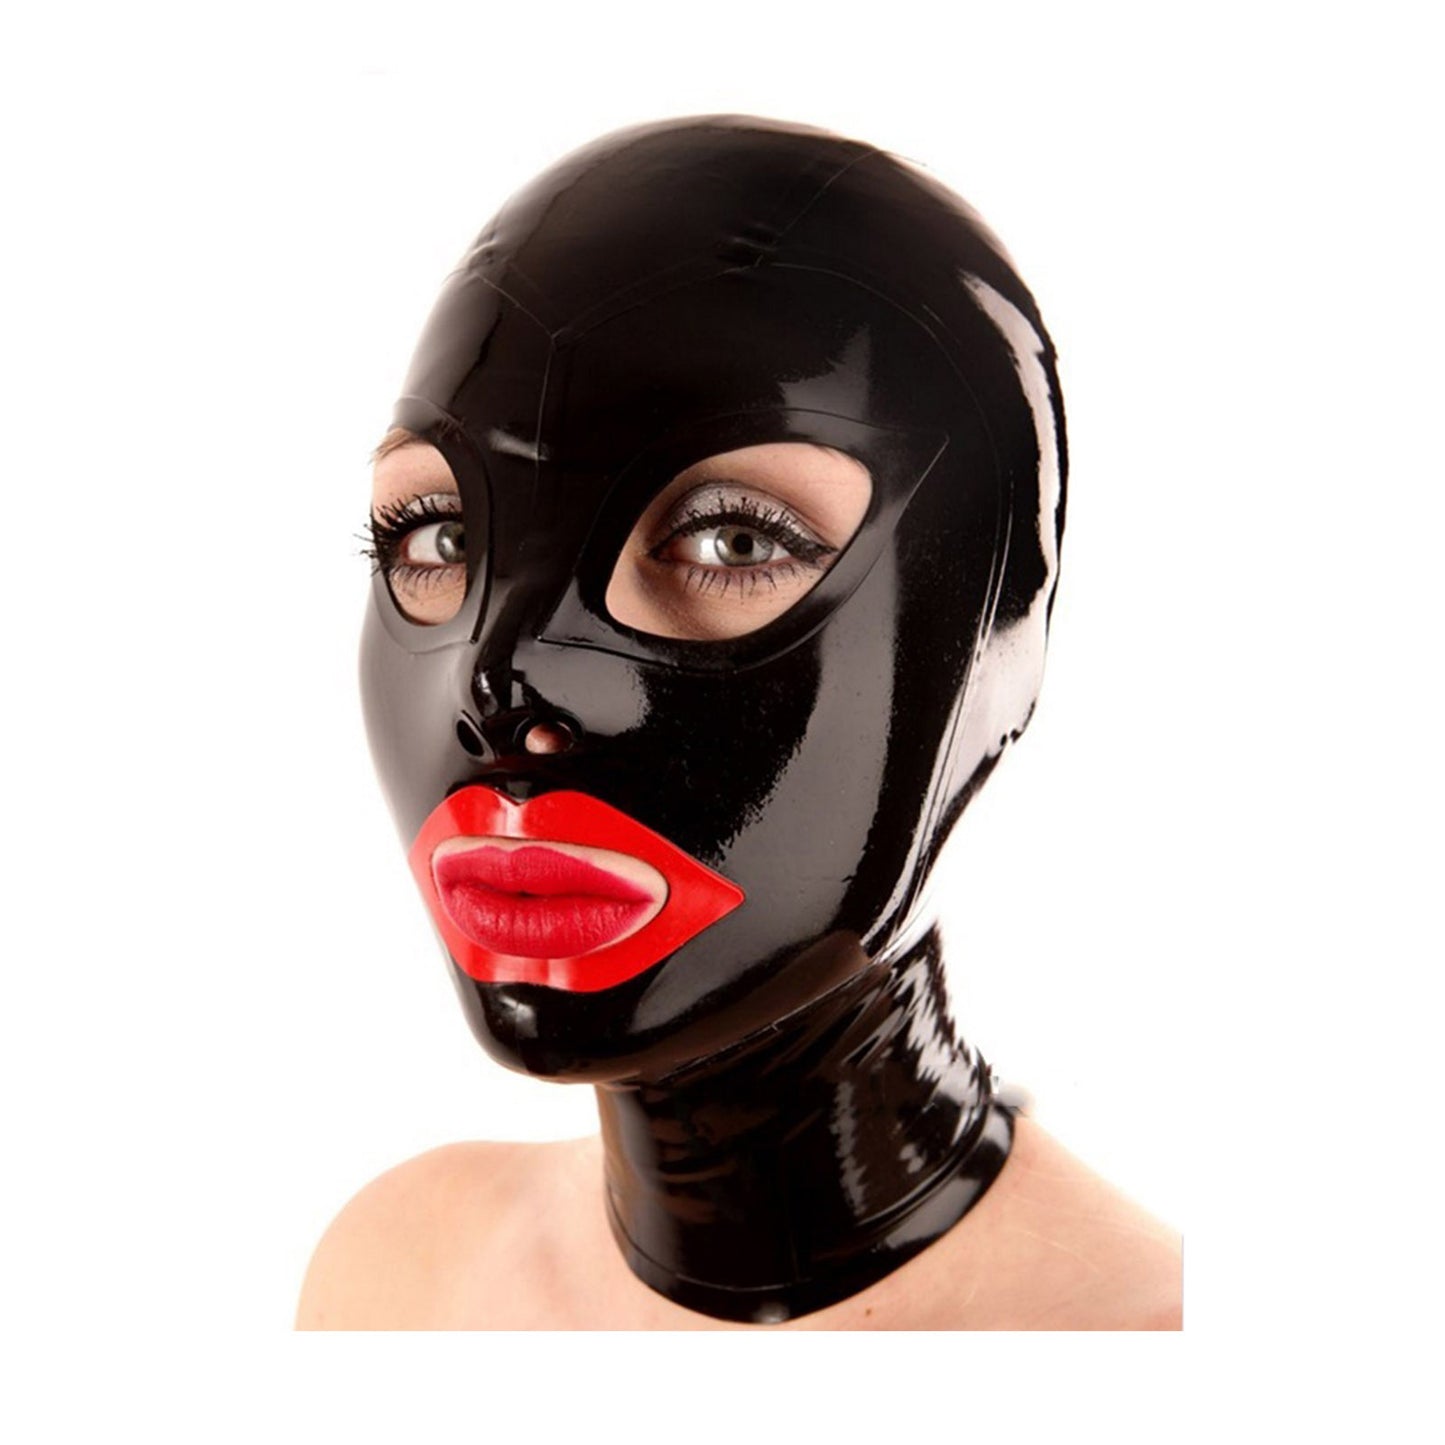 MONNIK Latex Hood Rubber Handmade Mask with Open Eyes and Mouth Red Edge for Party Clubwear Catsuit Cosplay